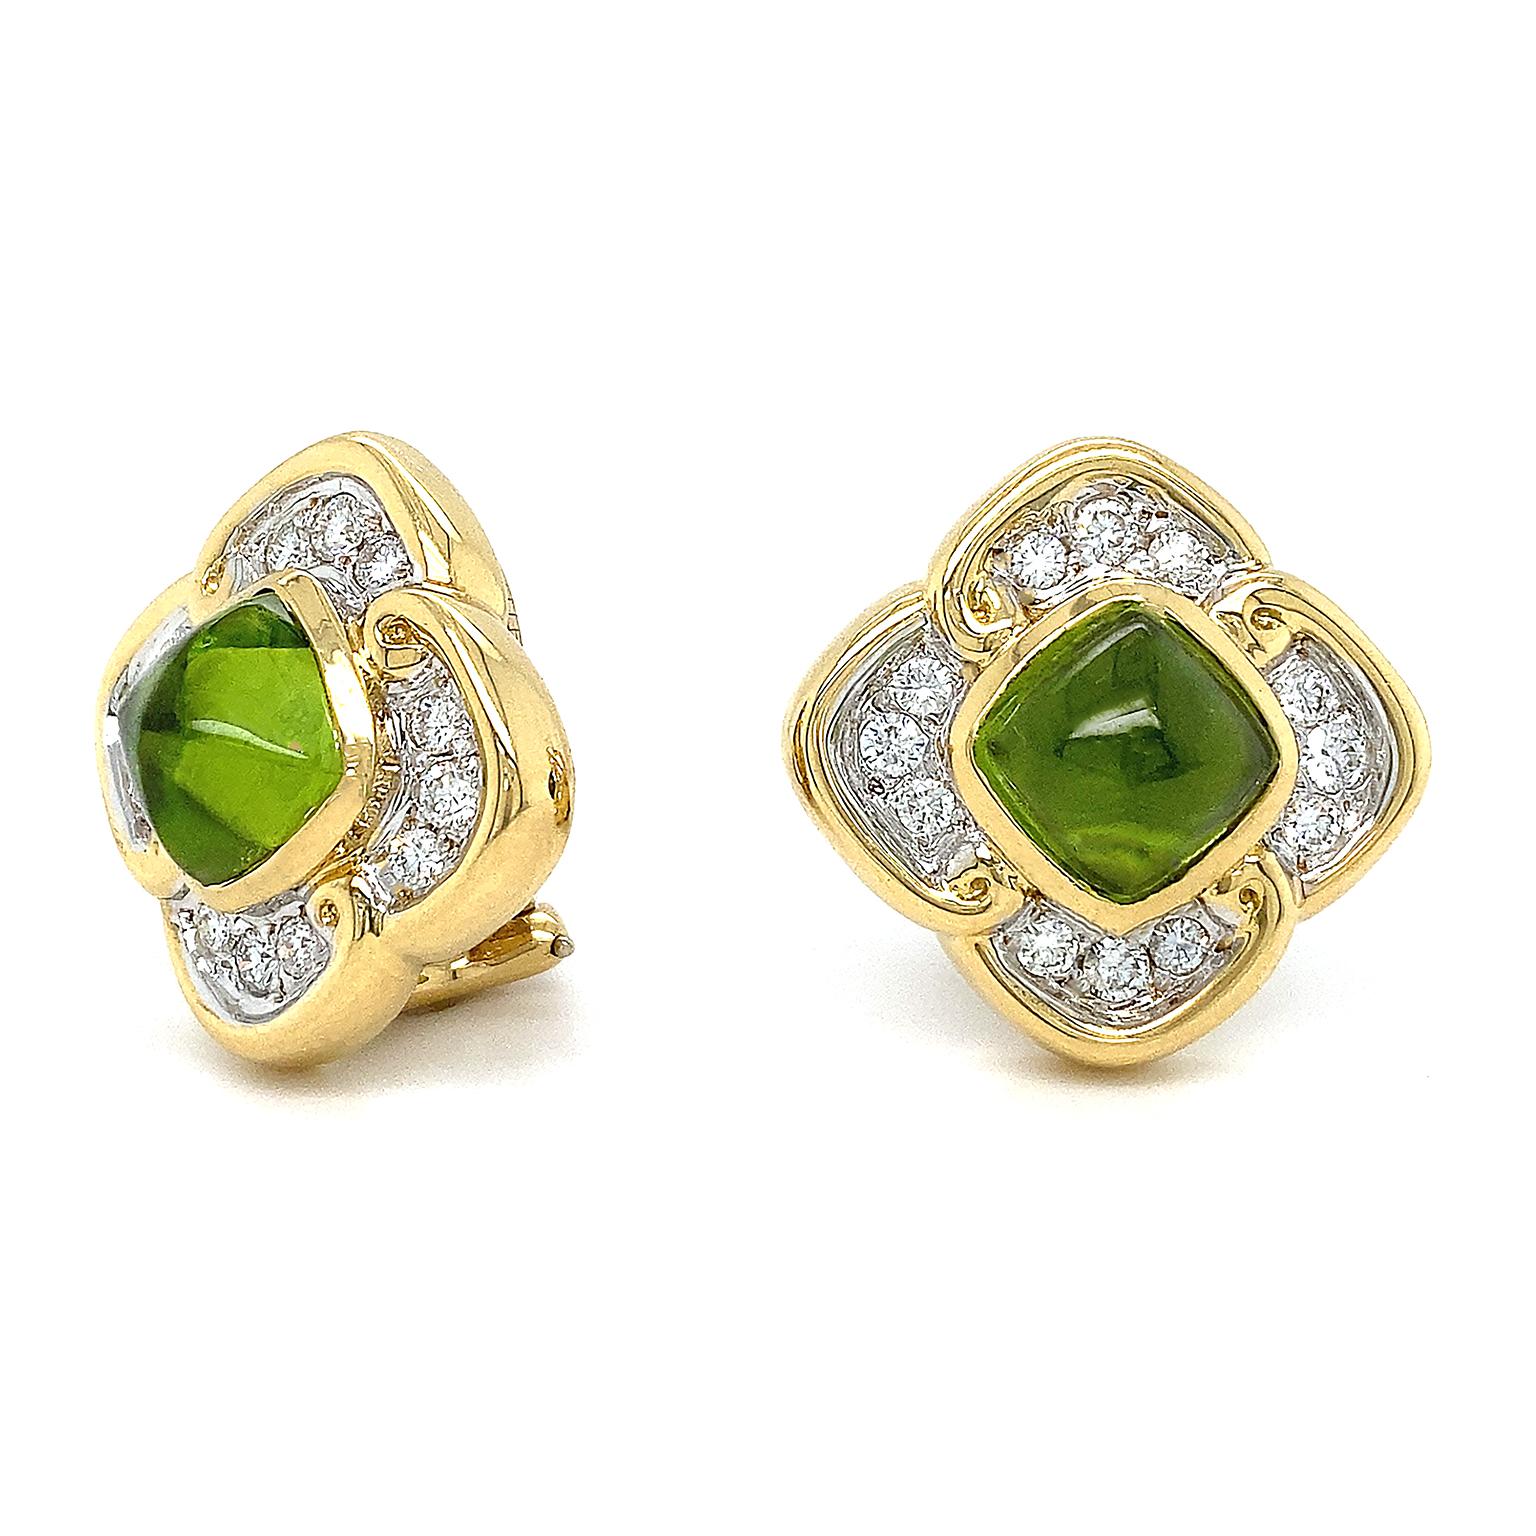 Influenced by the contour of a clover, 18k yellow gold forms the leaves that overlap in a curl. Embellishing within the leaves are brilliant cut diamonds. At the heart of these earrings, a smooth cushion cut of peridot dazzles in the center. The